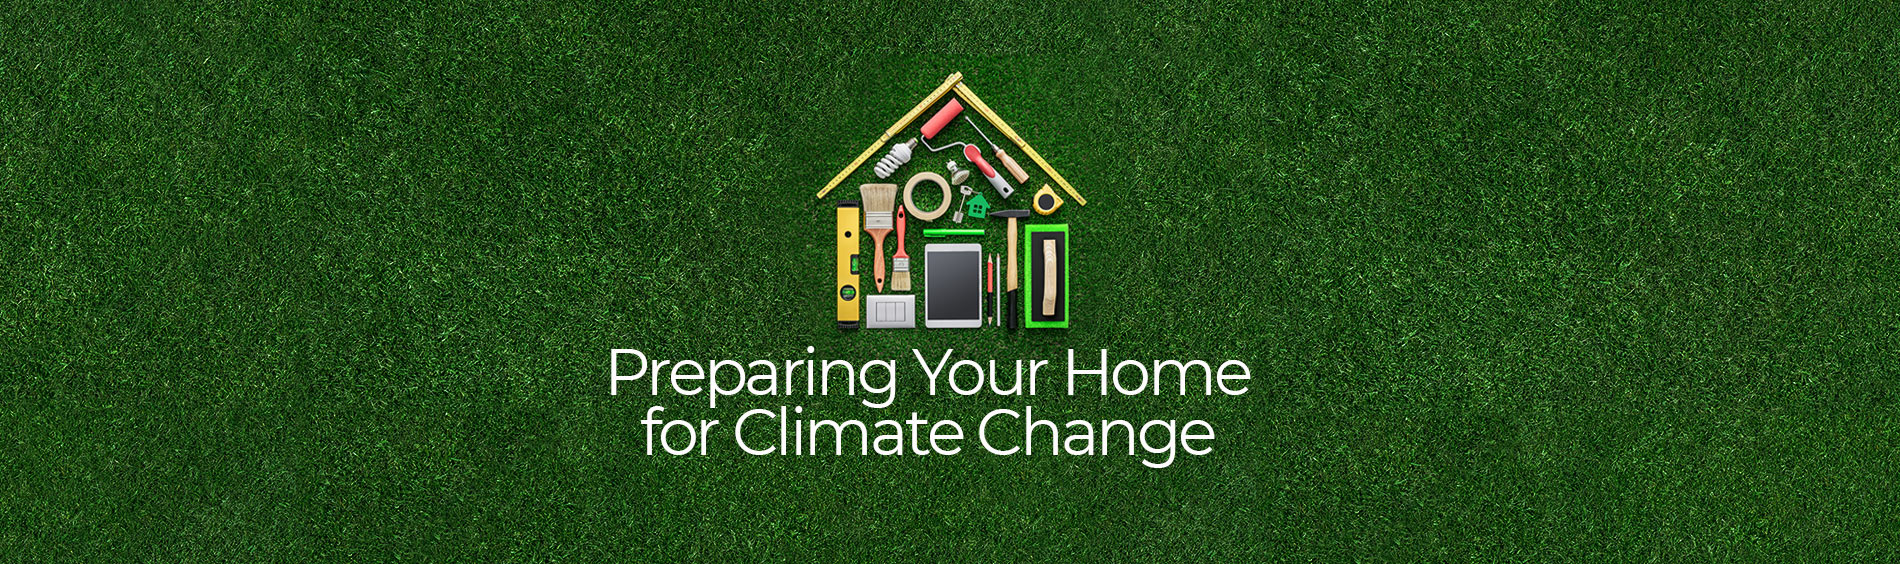 Text that reads "preparing your home for climate change" with a house icon